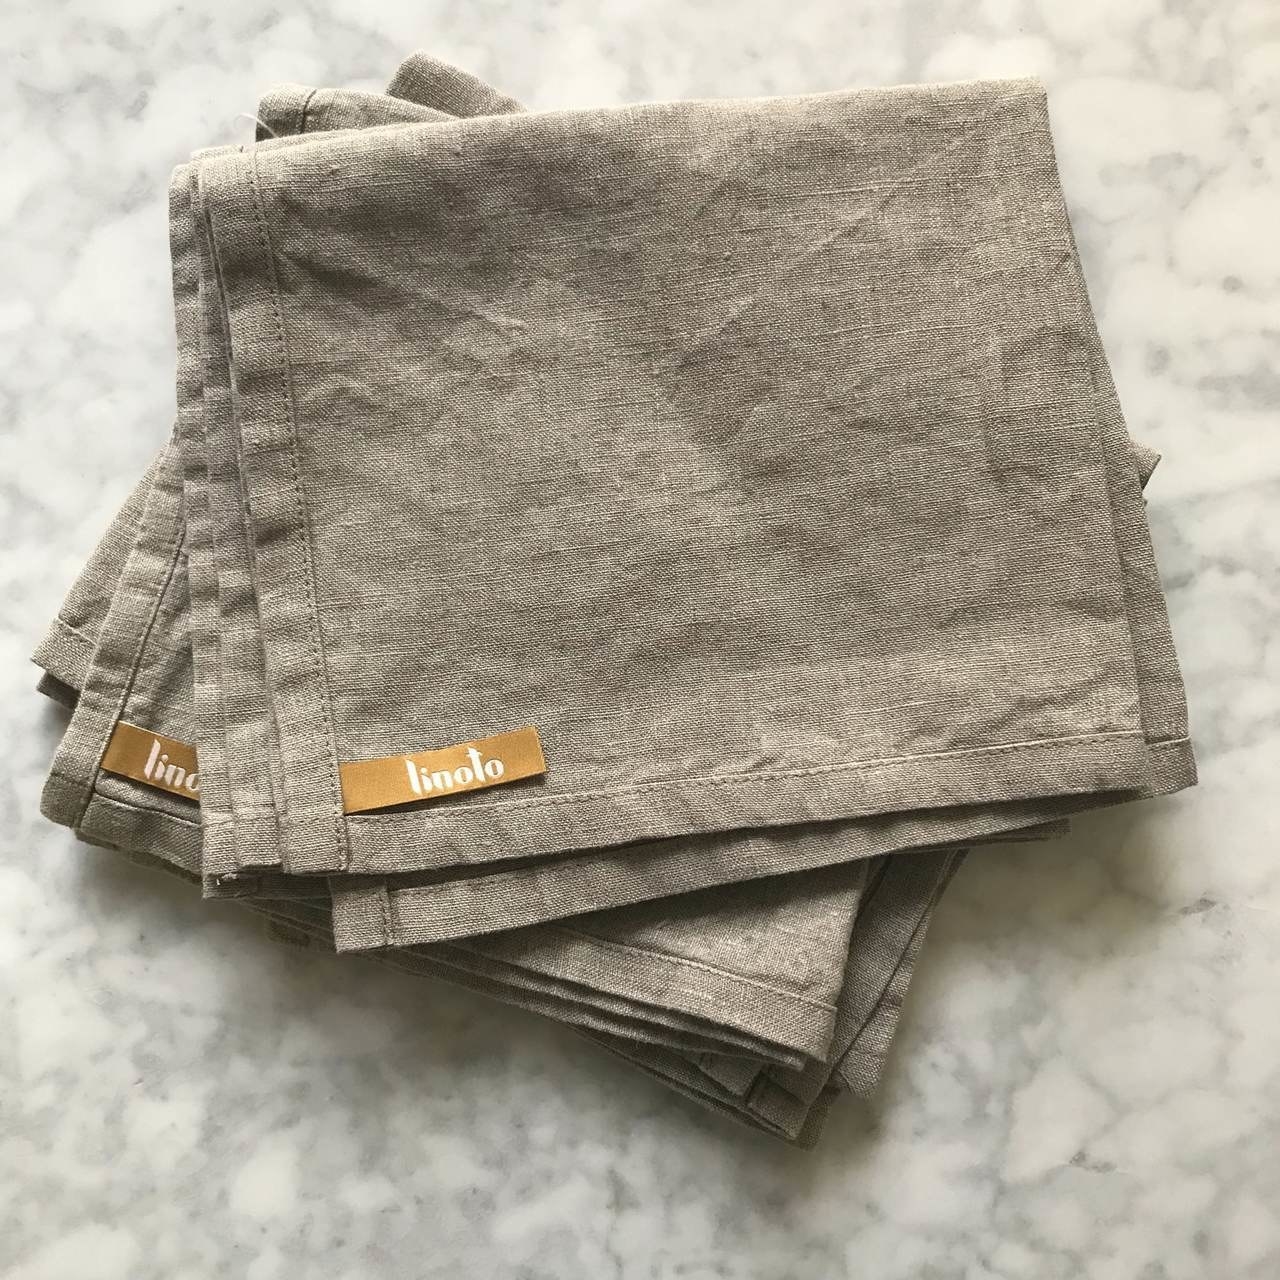 several folded tan linen towels with linoto labels